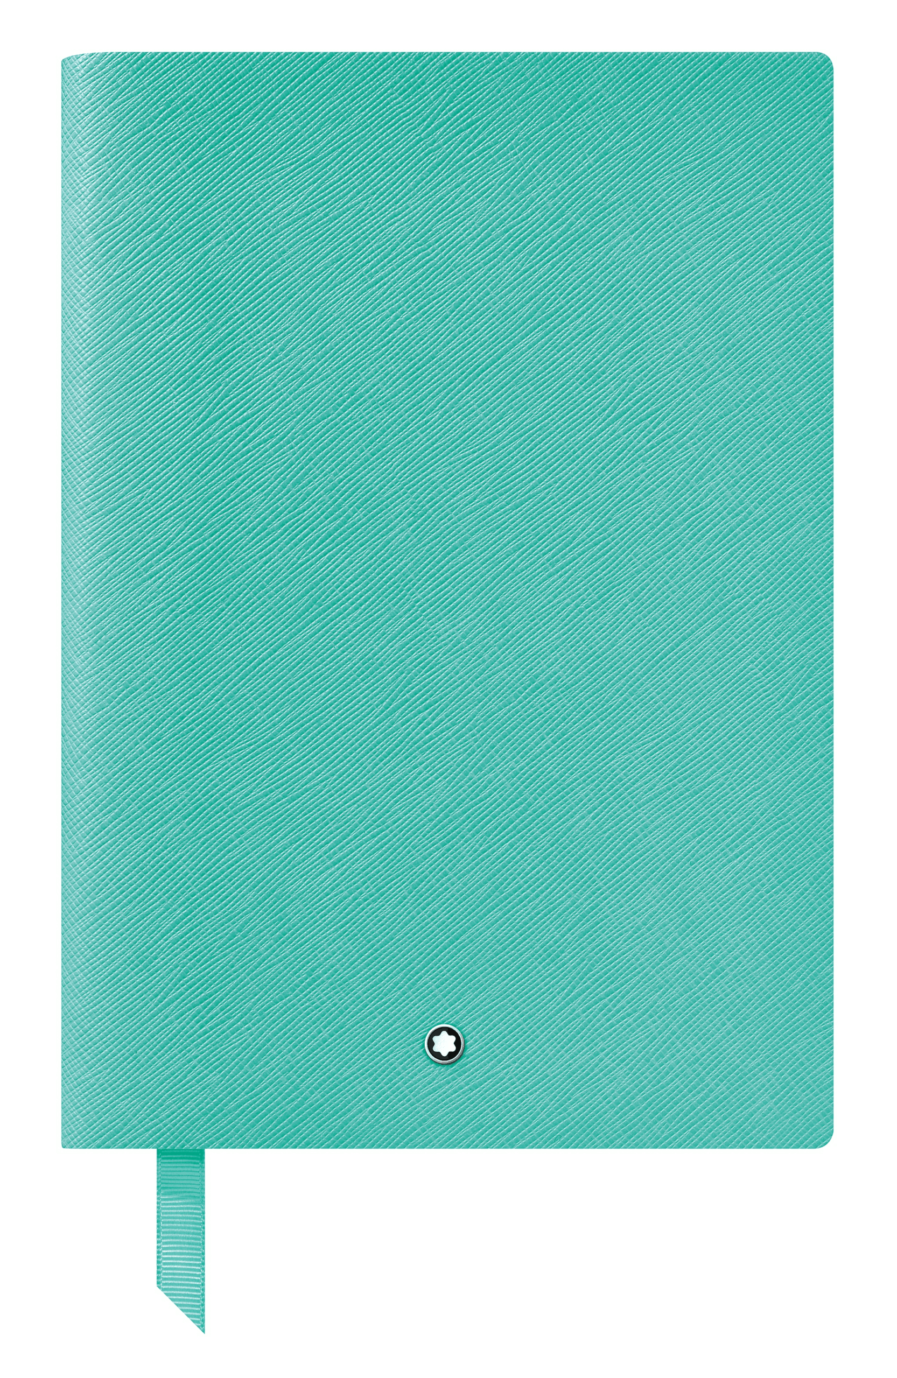 Carnet #146, Turquoise